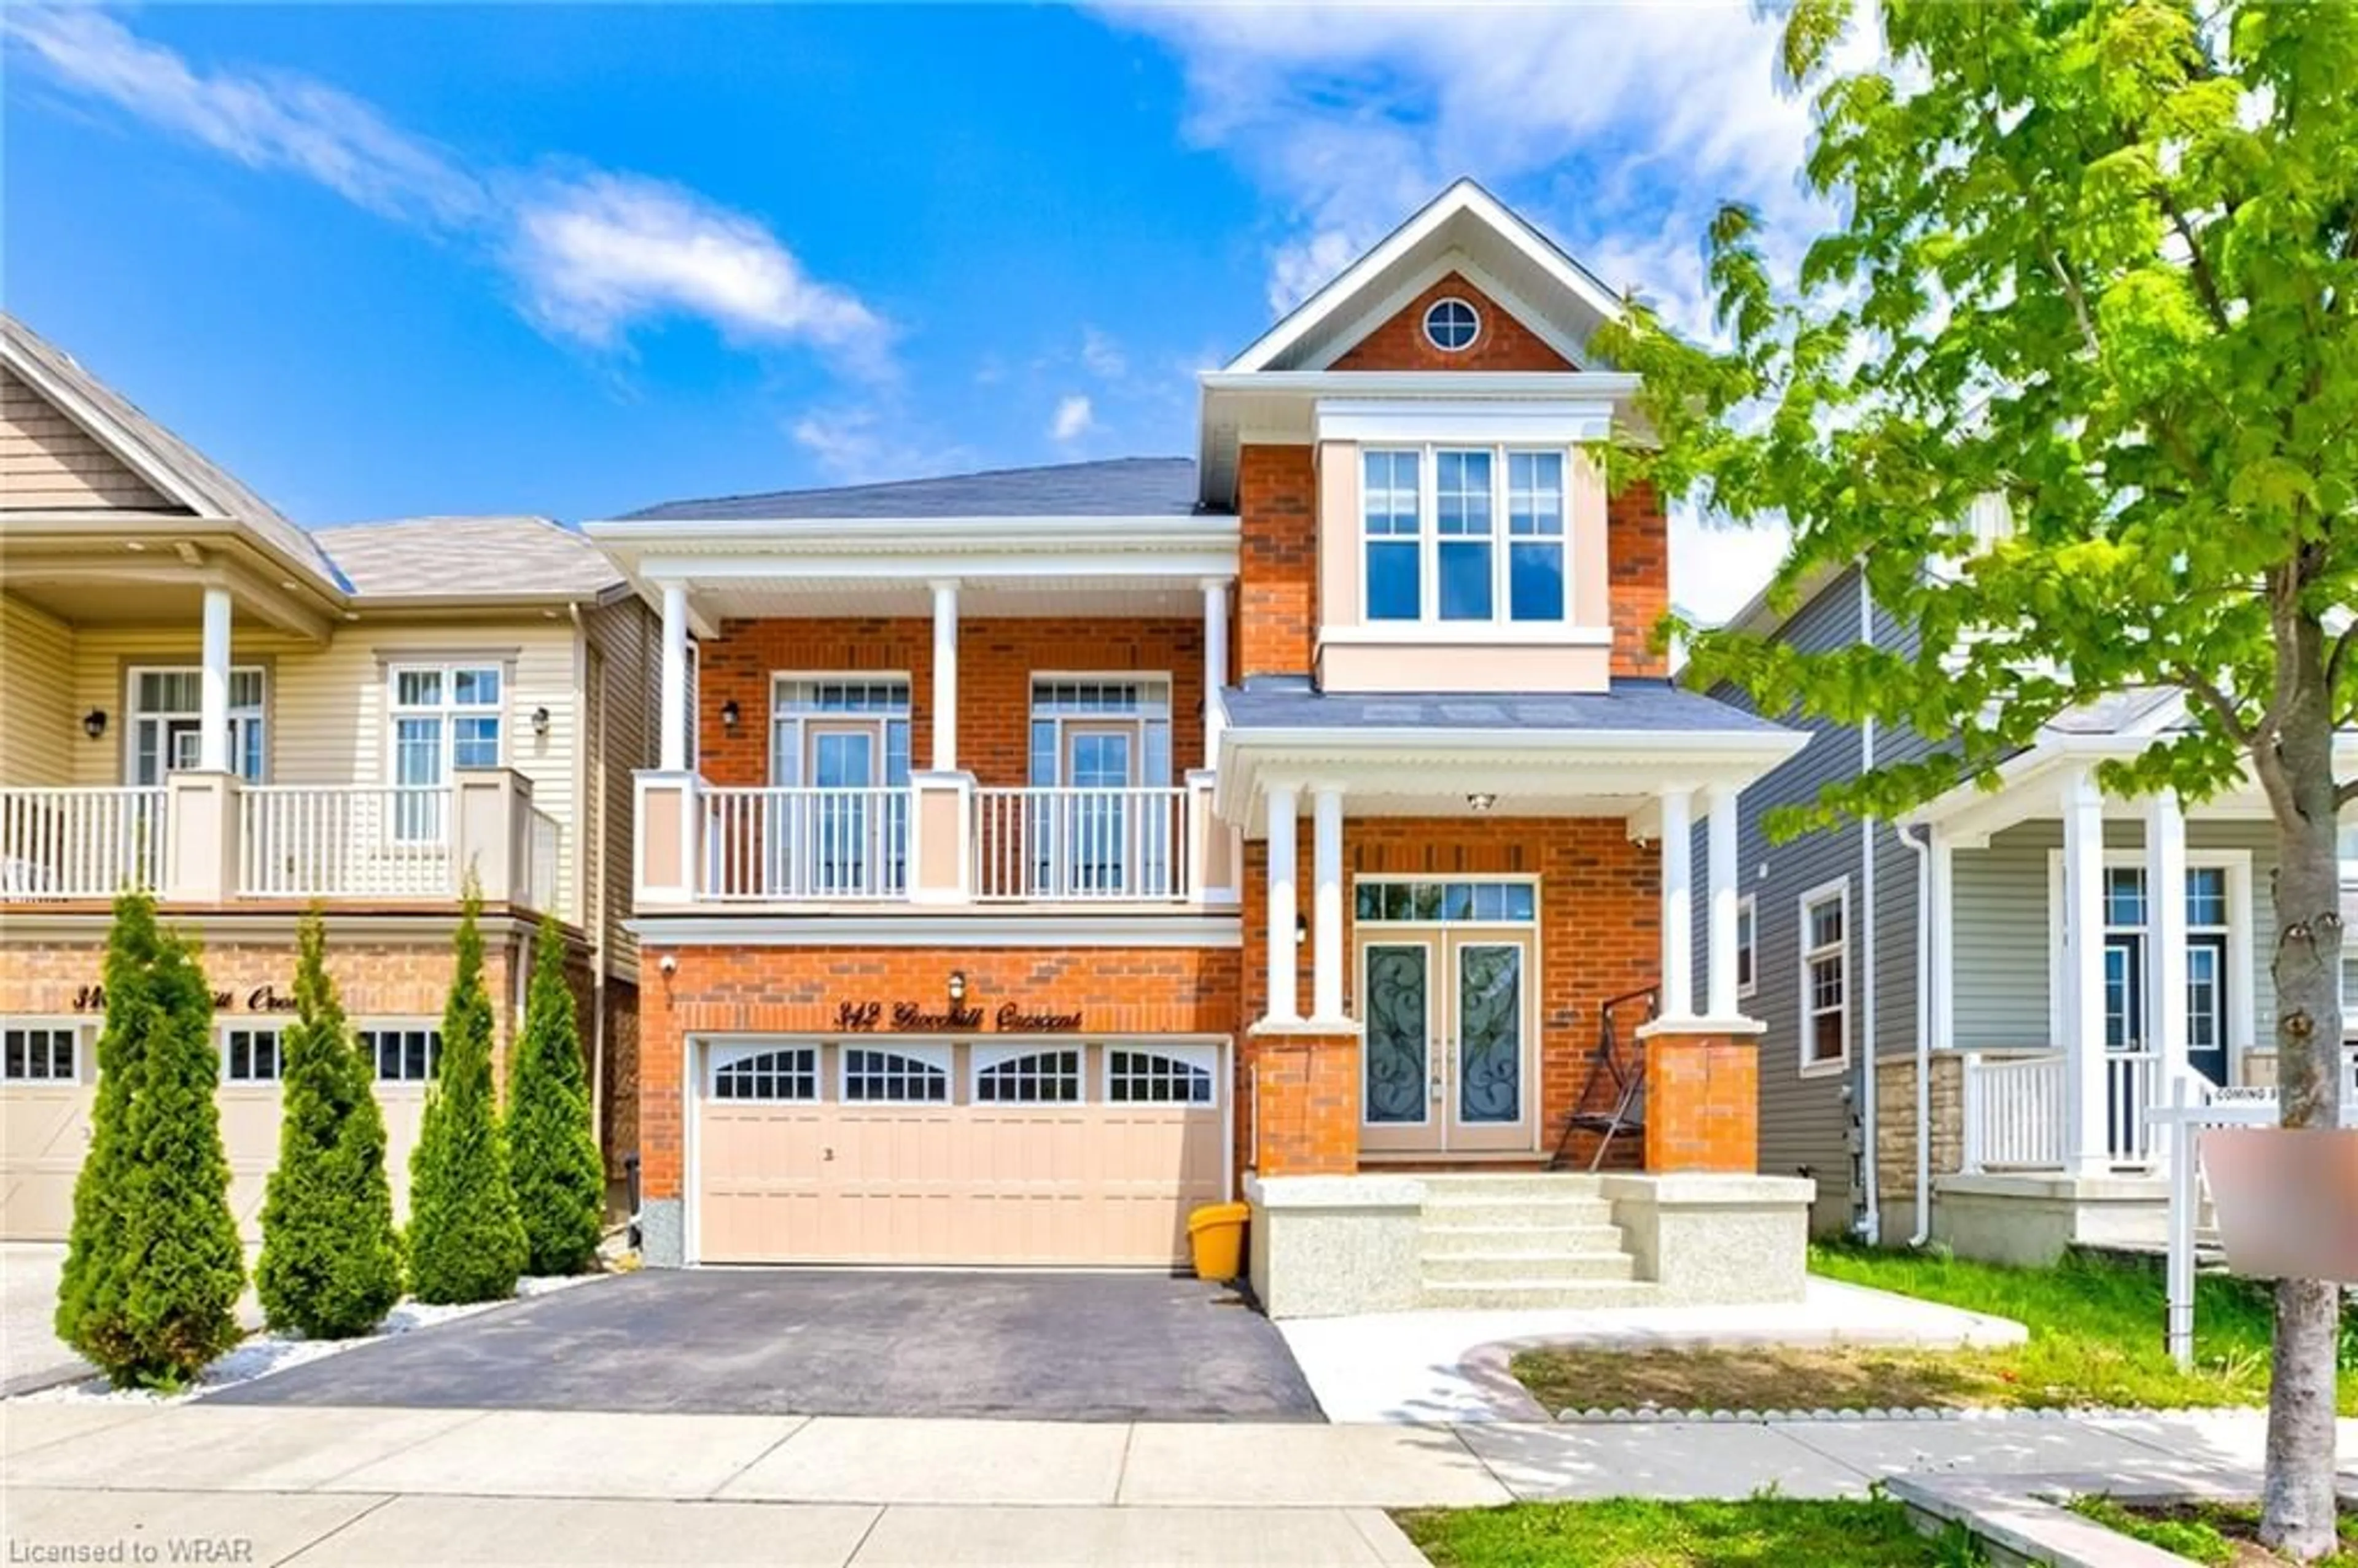 Home with brick exterior material for 342 Grovehill Cres, Kitchener Ontario N2R 0K1